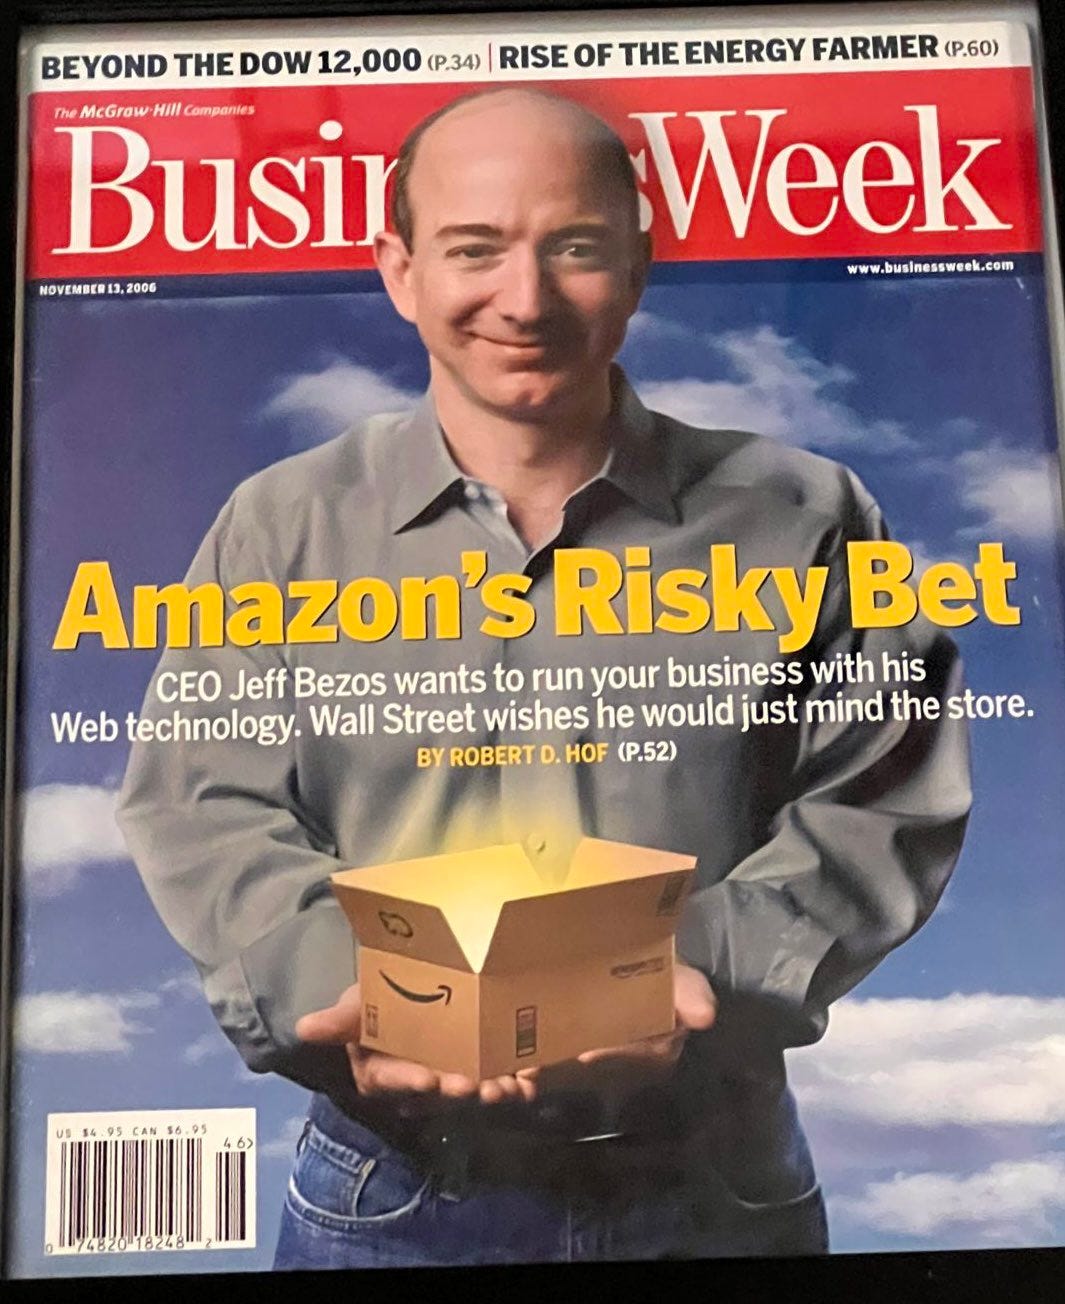 Jeff Bezos on X: "I have this old 2006 BusinessWeek framed as a reminder.  The “risky bet” that Wall Street disliked was AWS, which generated revenue  of more than $62 billion last